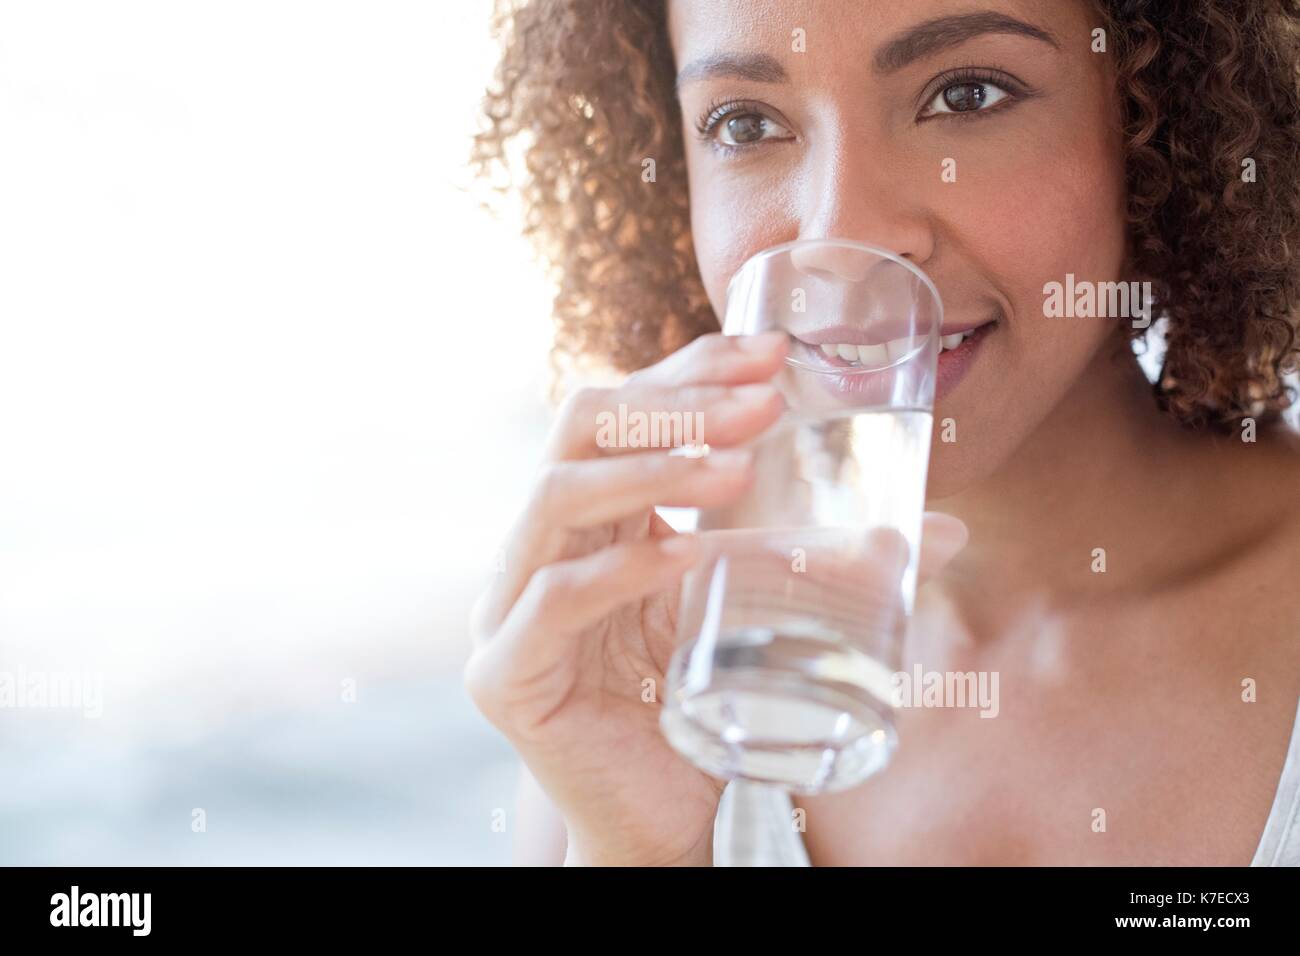 Mid adult woman drinking water. Stock Photo